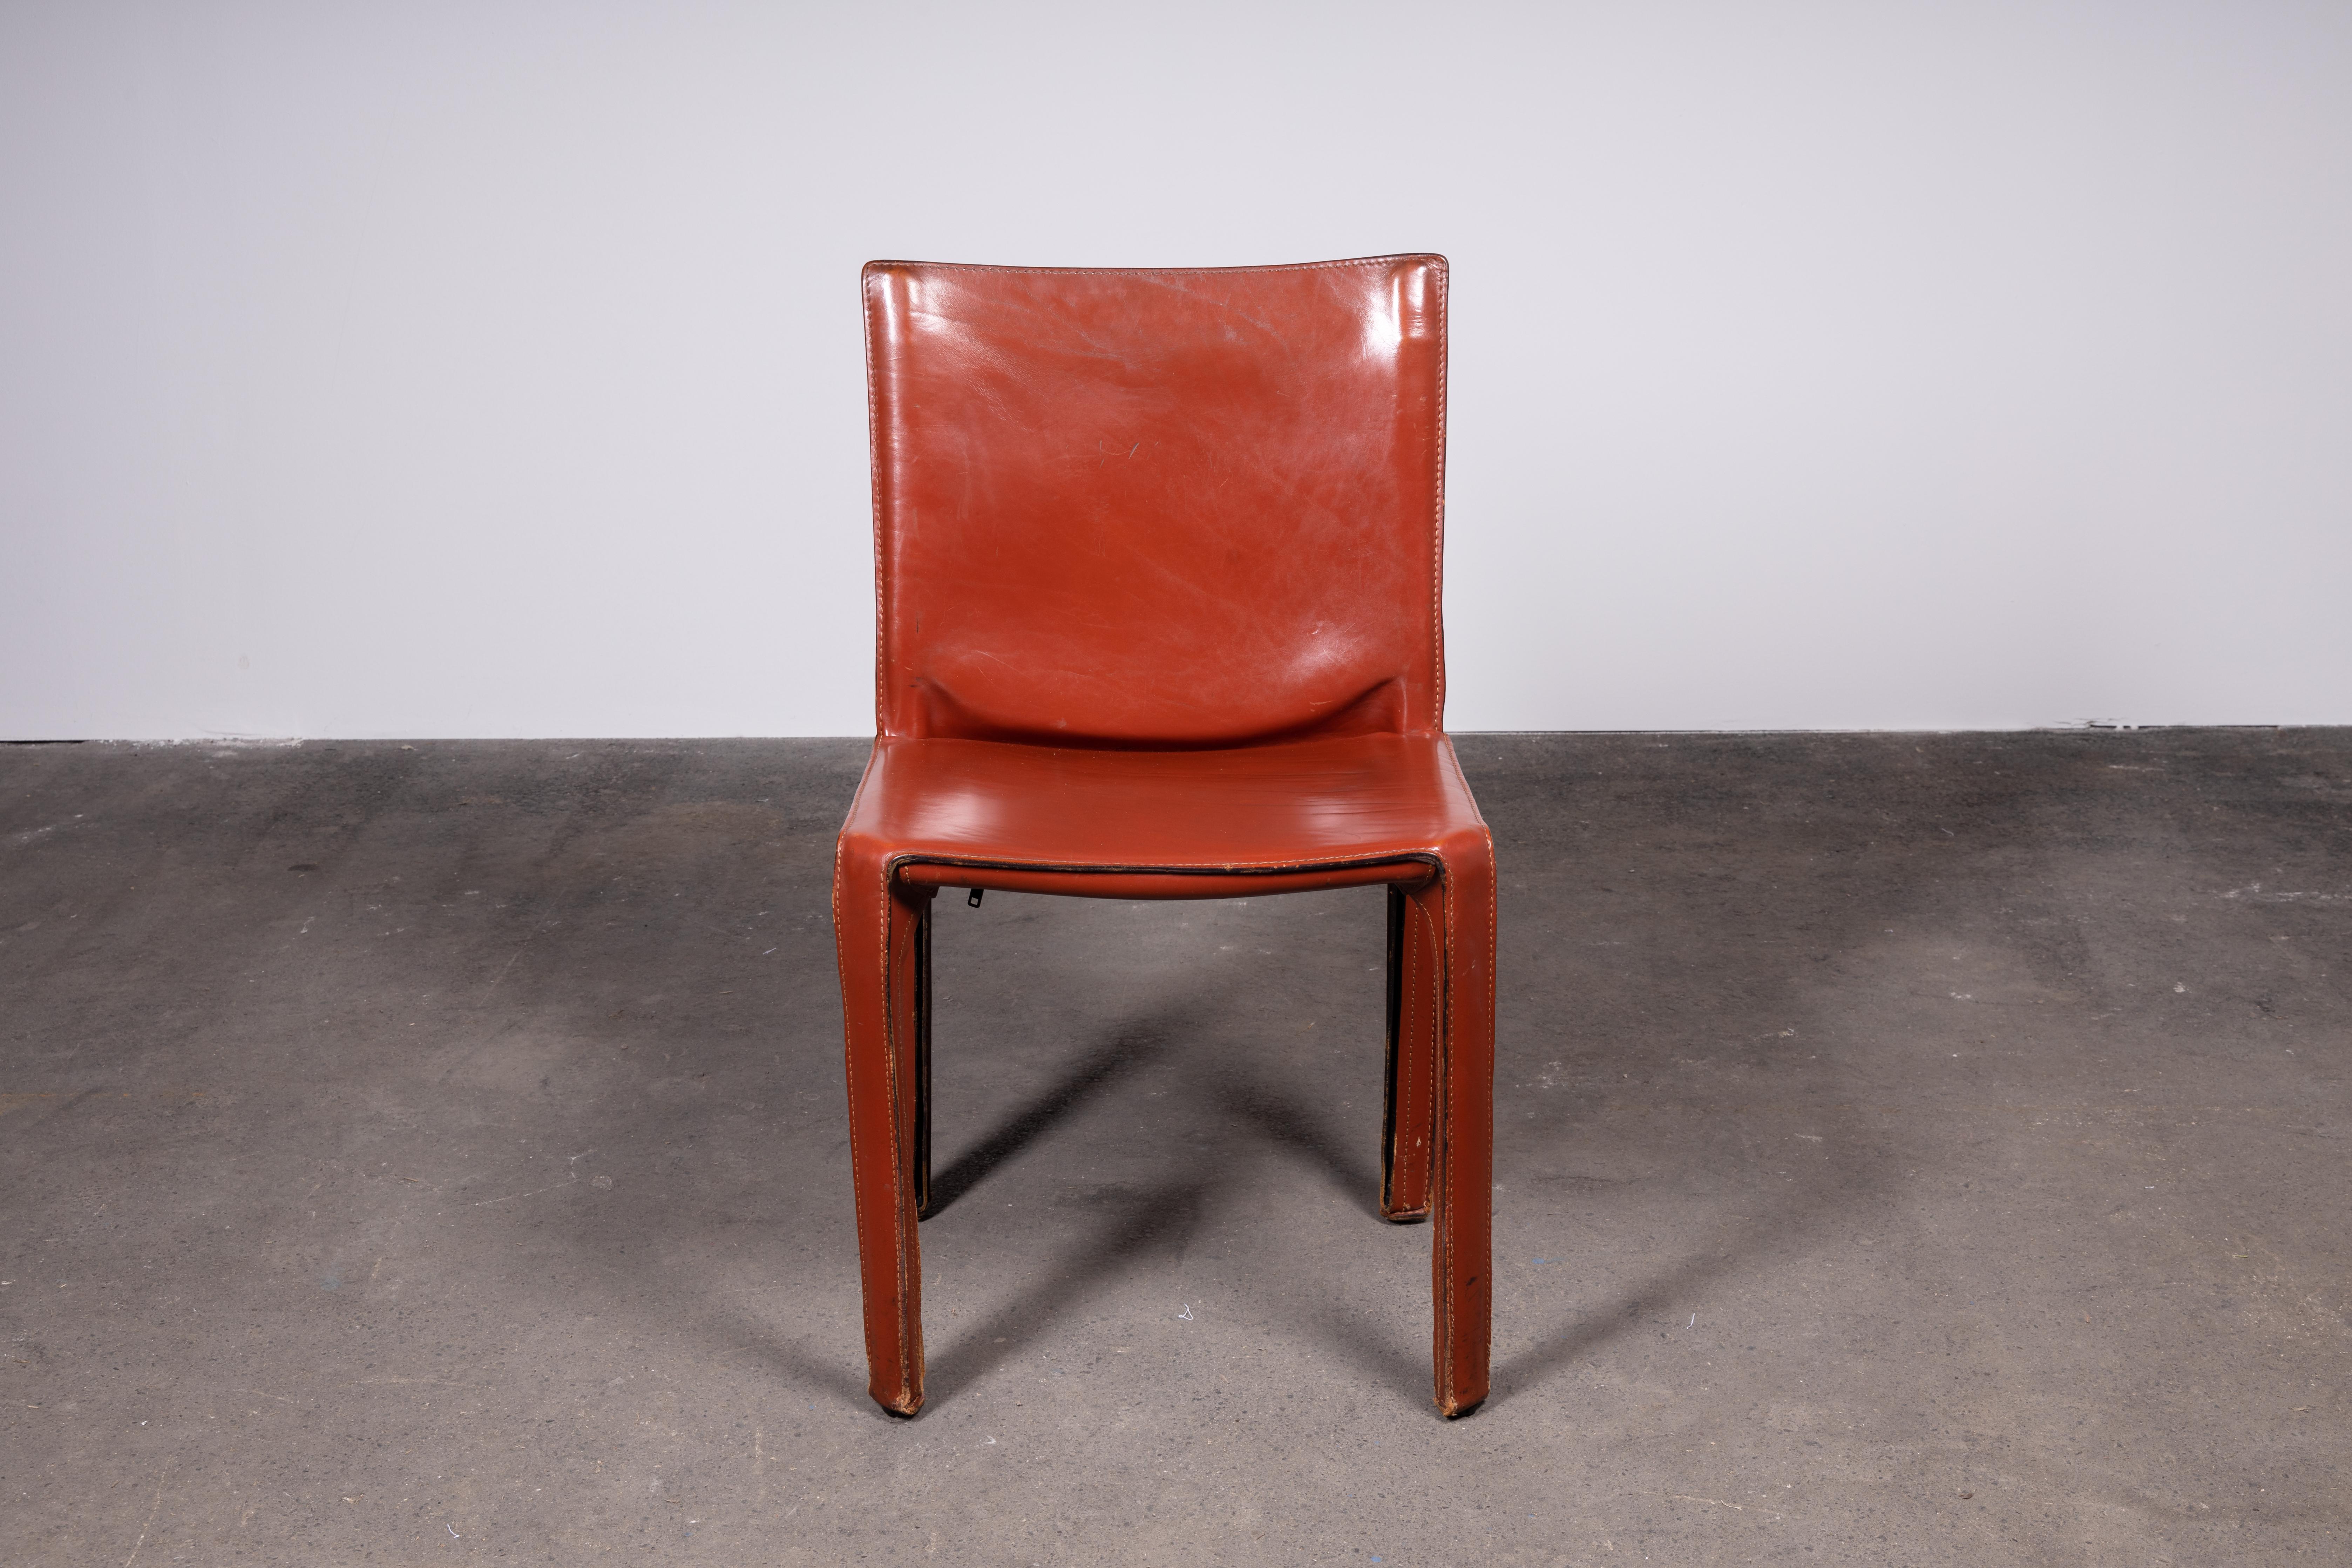 Set of four Mario Bellini CAB 412 chairs, made by Cassina in the 1980s. Flexible steel frame covered with a skin of high quality cognac / Russian Red (also known as Bulgarian Red) saddle leather. This elegant, versatile chair is equally suitable for